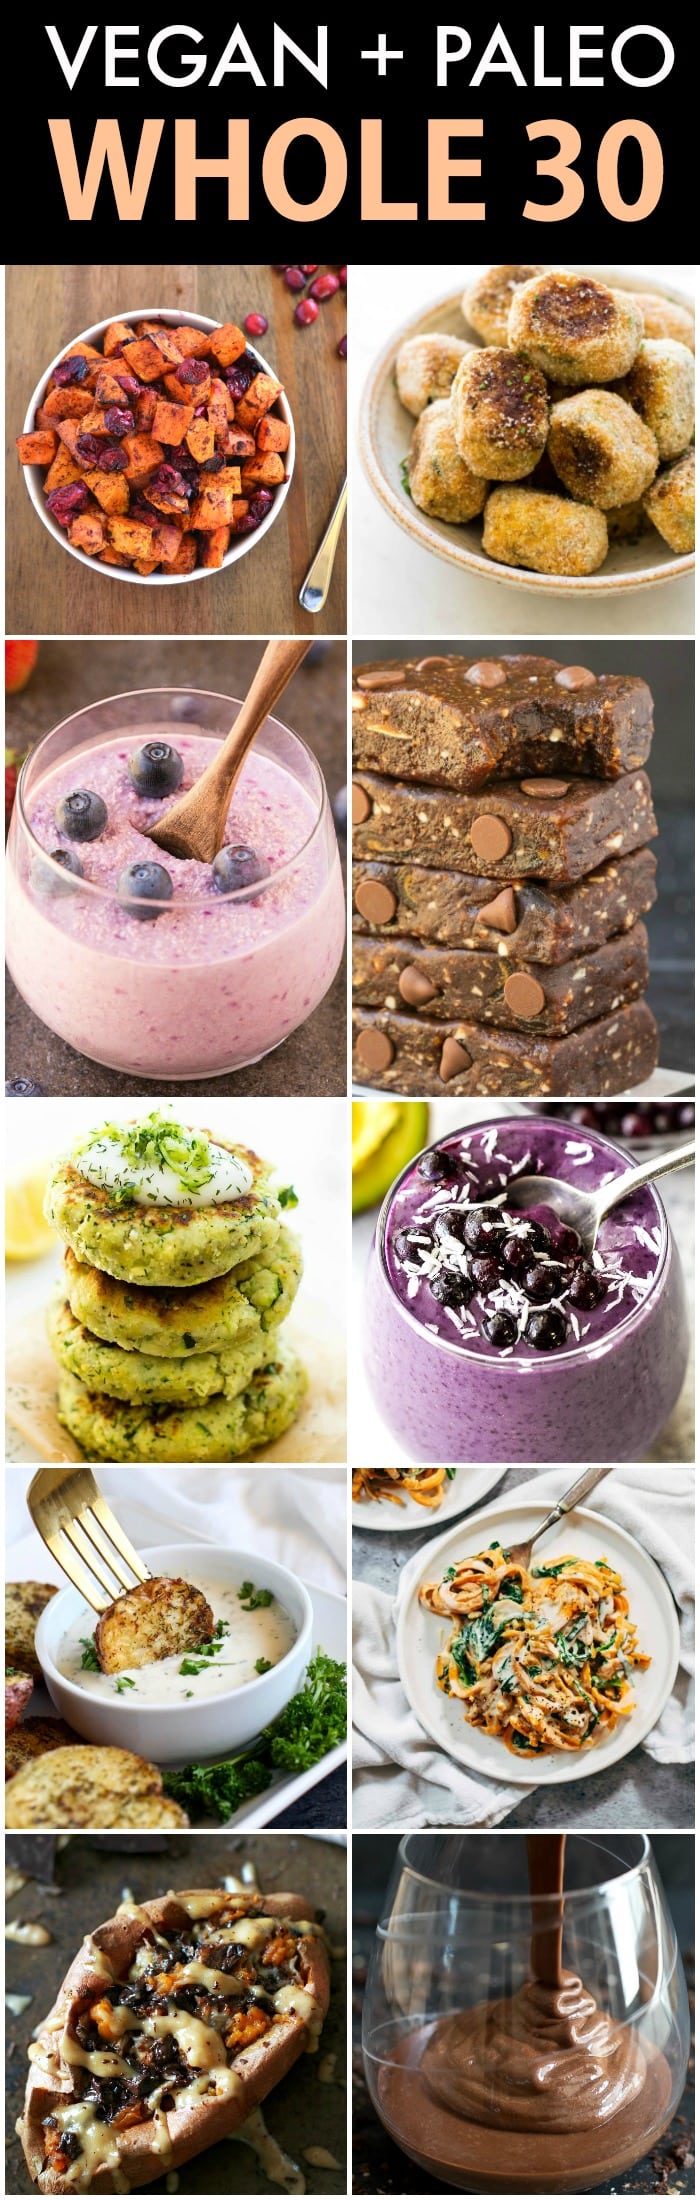 A collage of 10 vegan and paleo whole30 approved foods and recipes, including smoothies, larabars, sweet potato noodles, zucchini fritters and baked potatoes